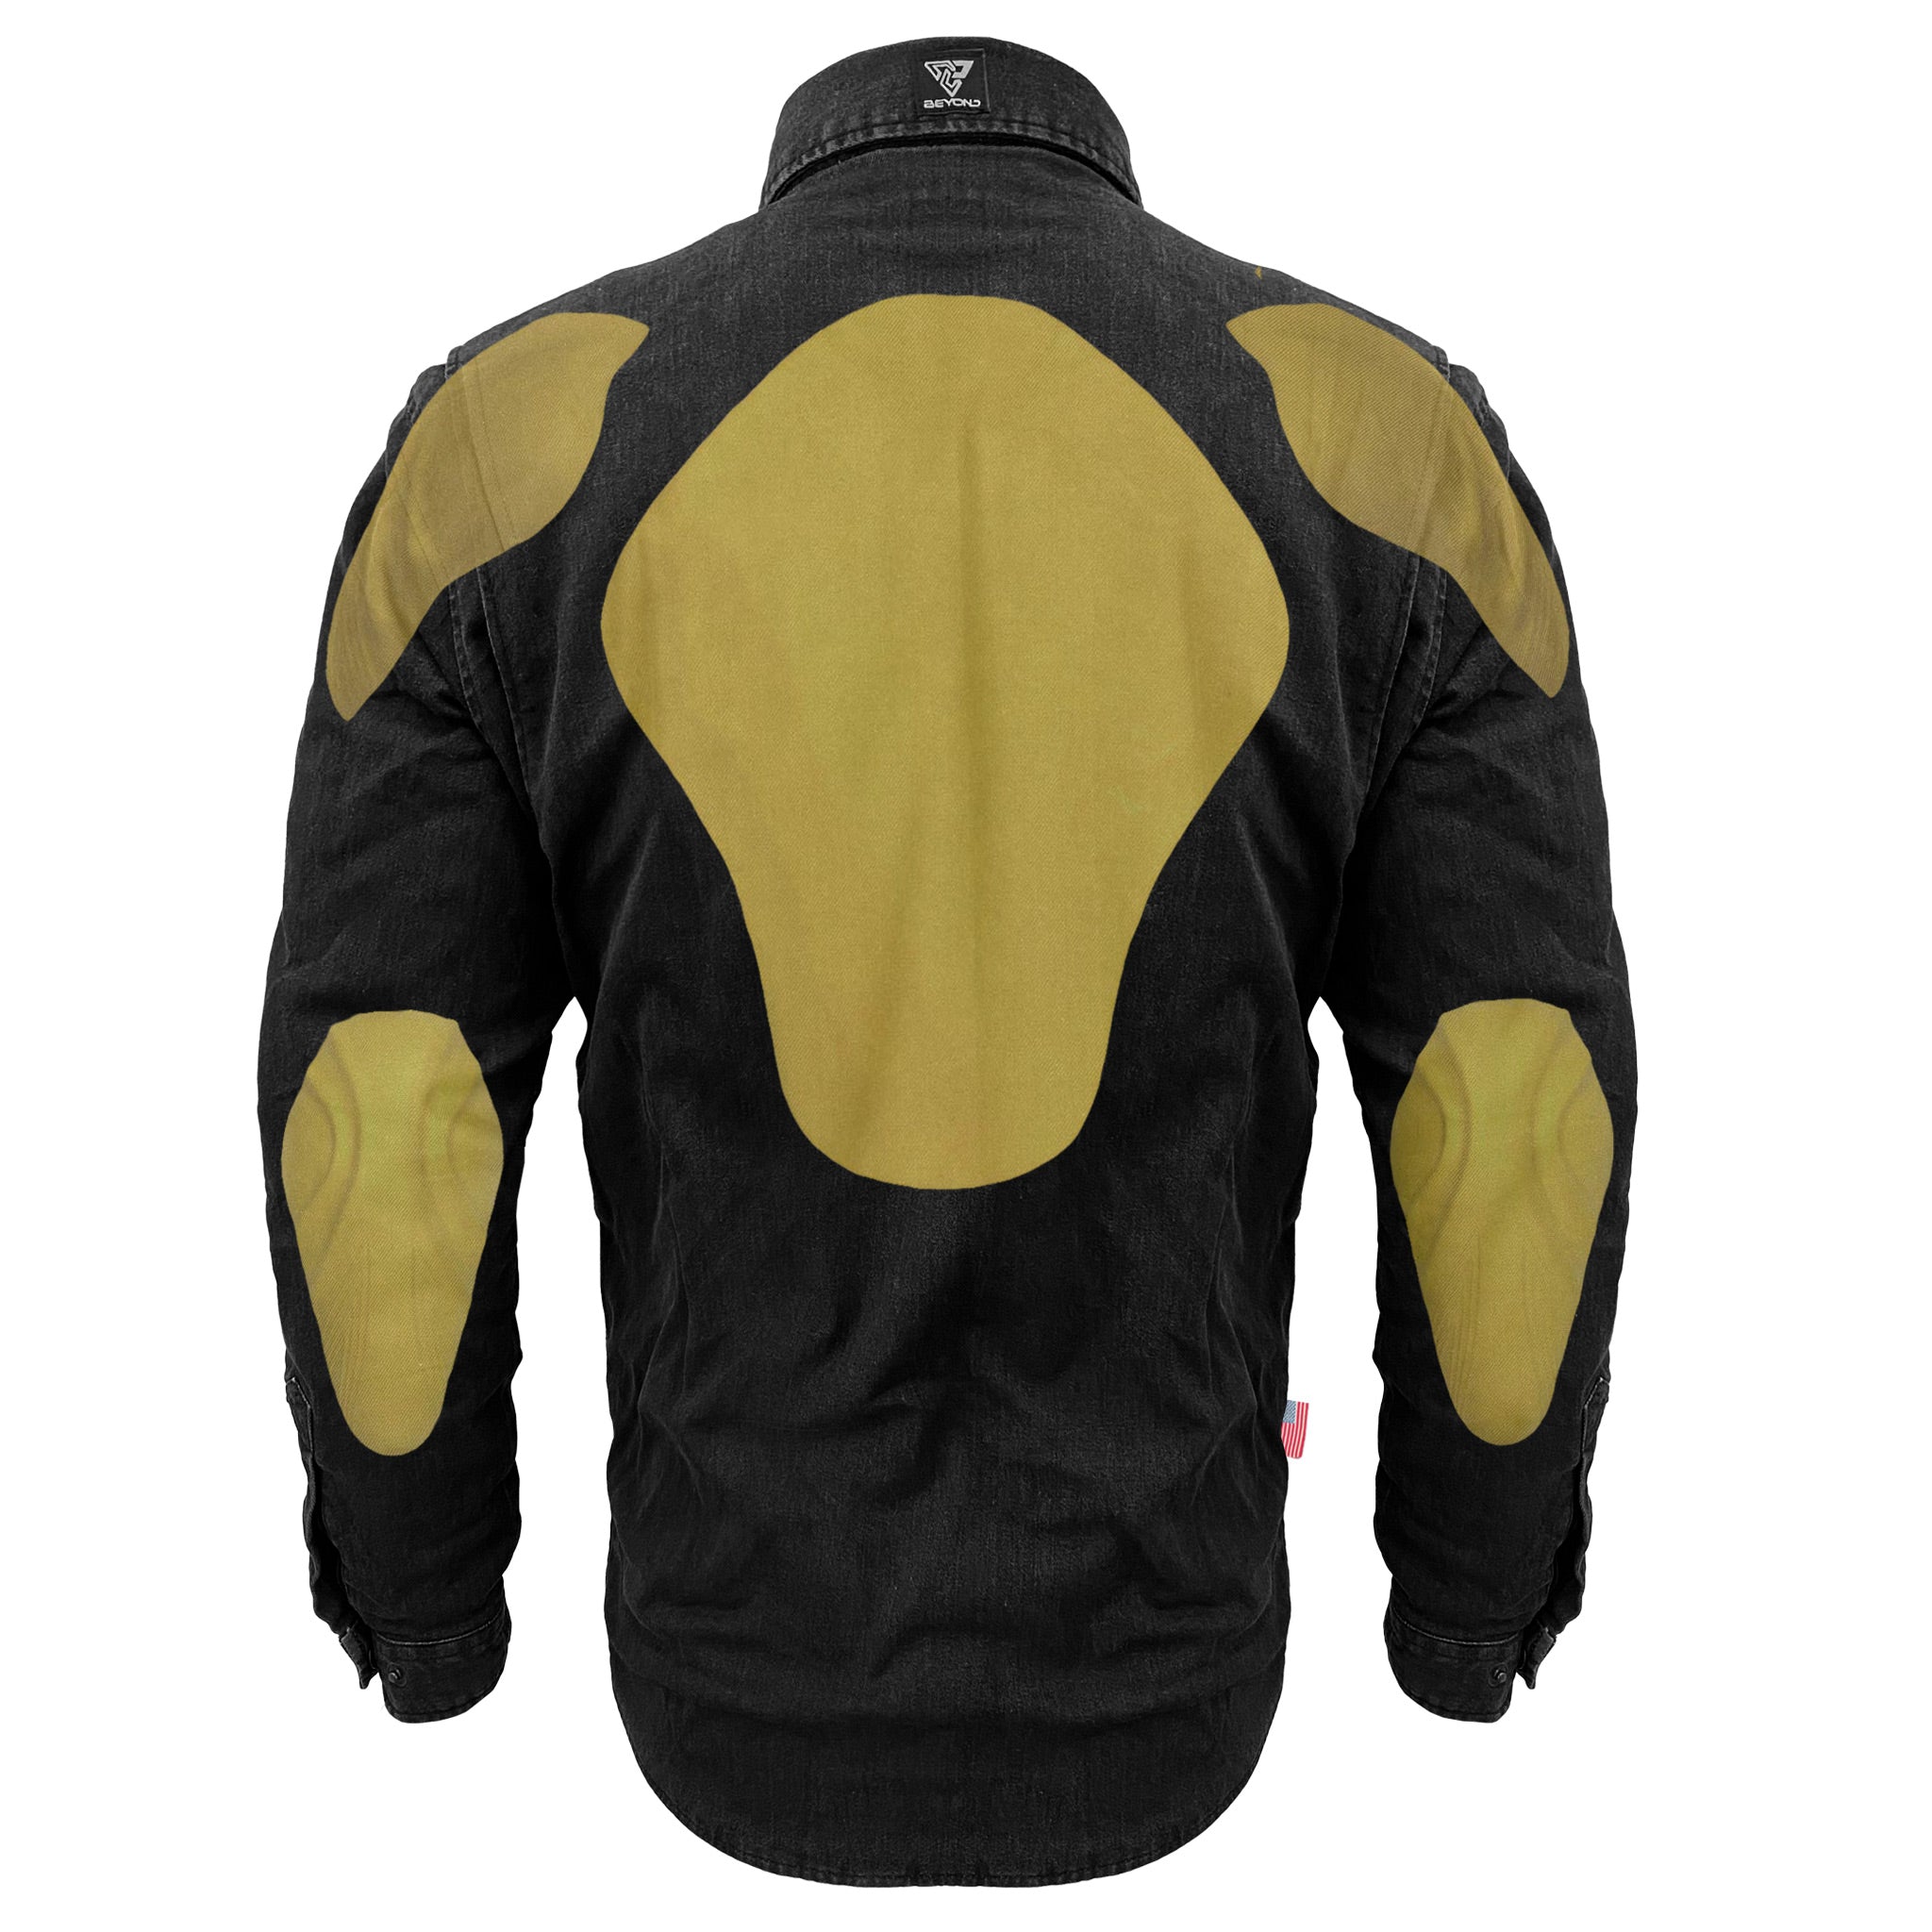 Protective Jeans Jacket - Black with Pads